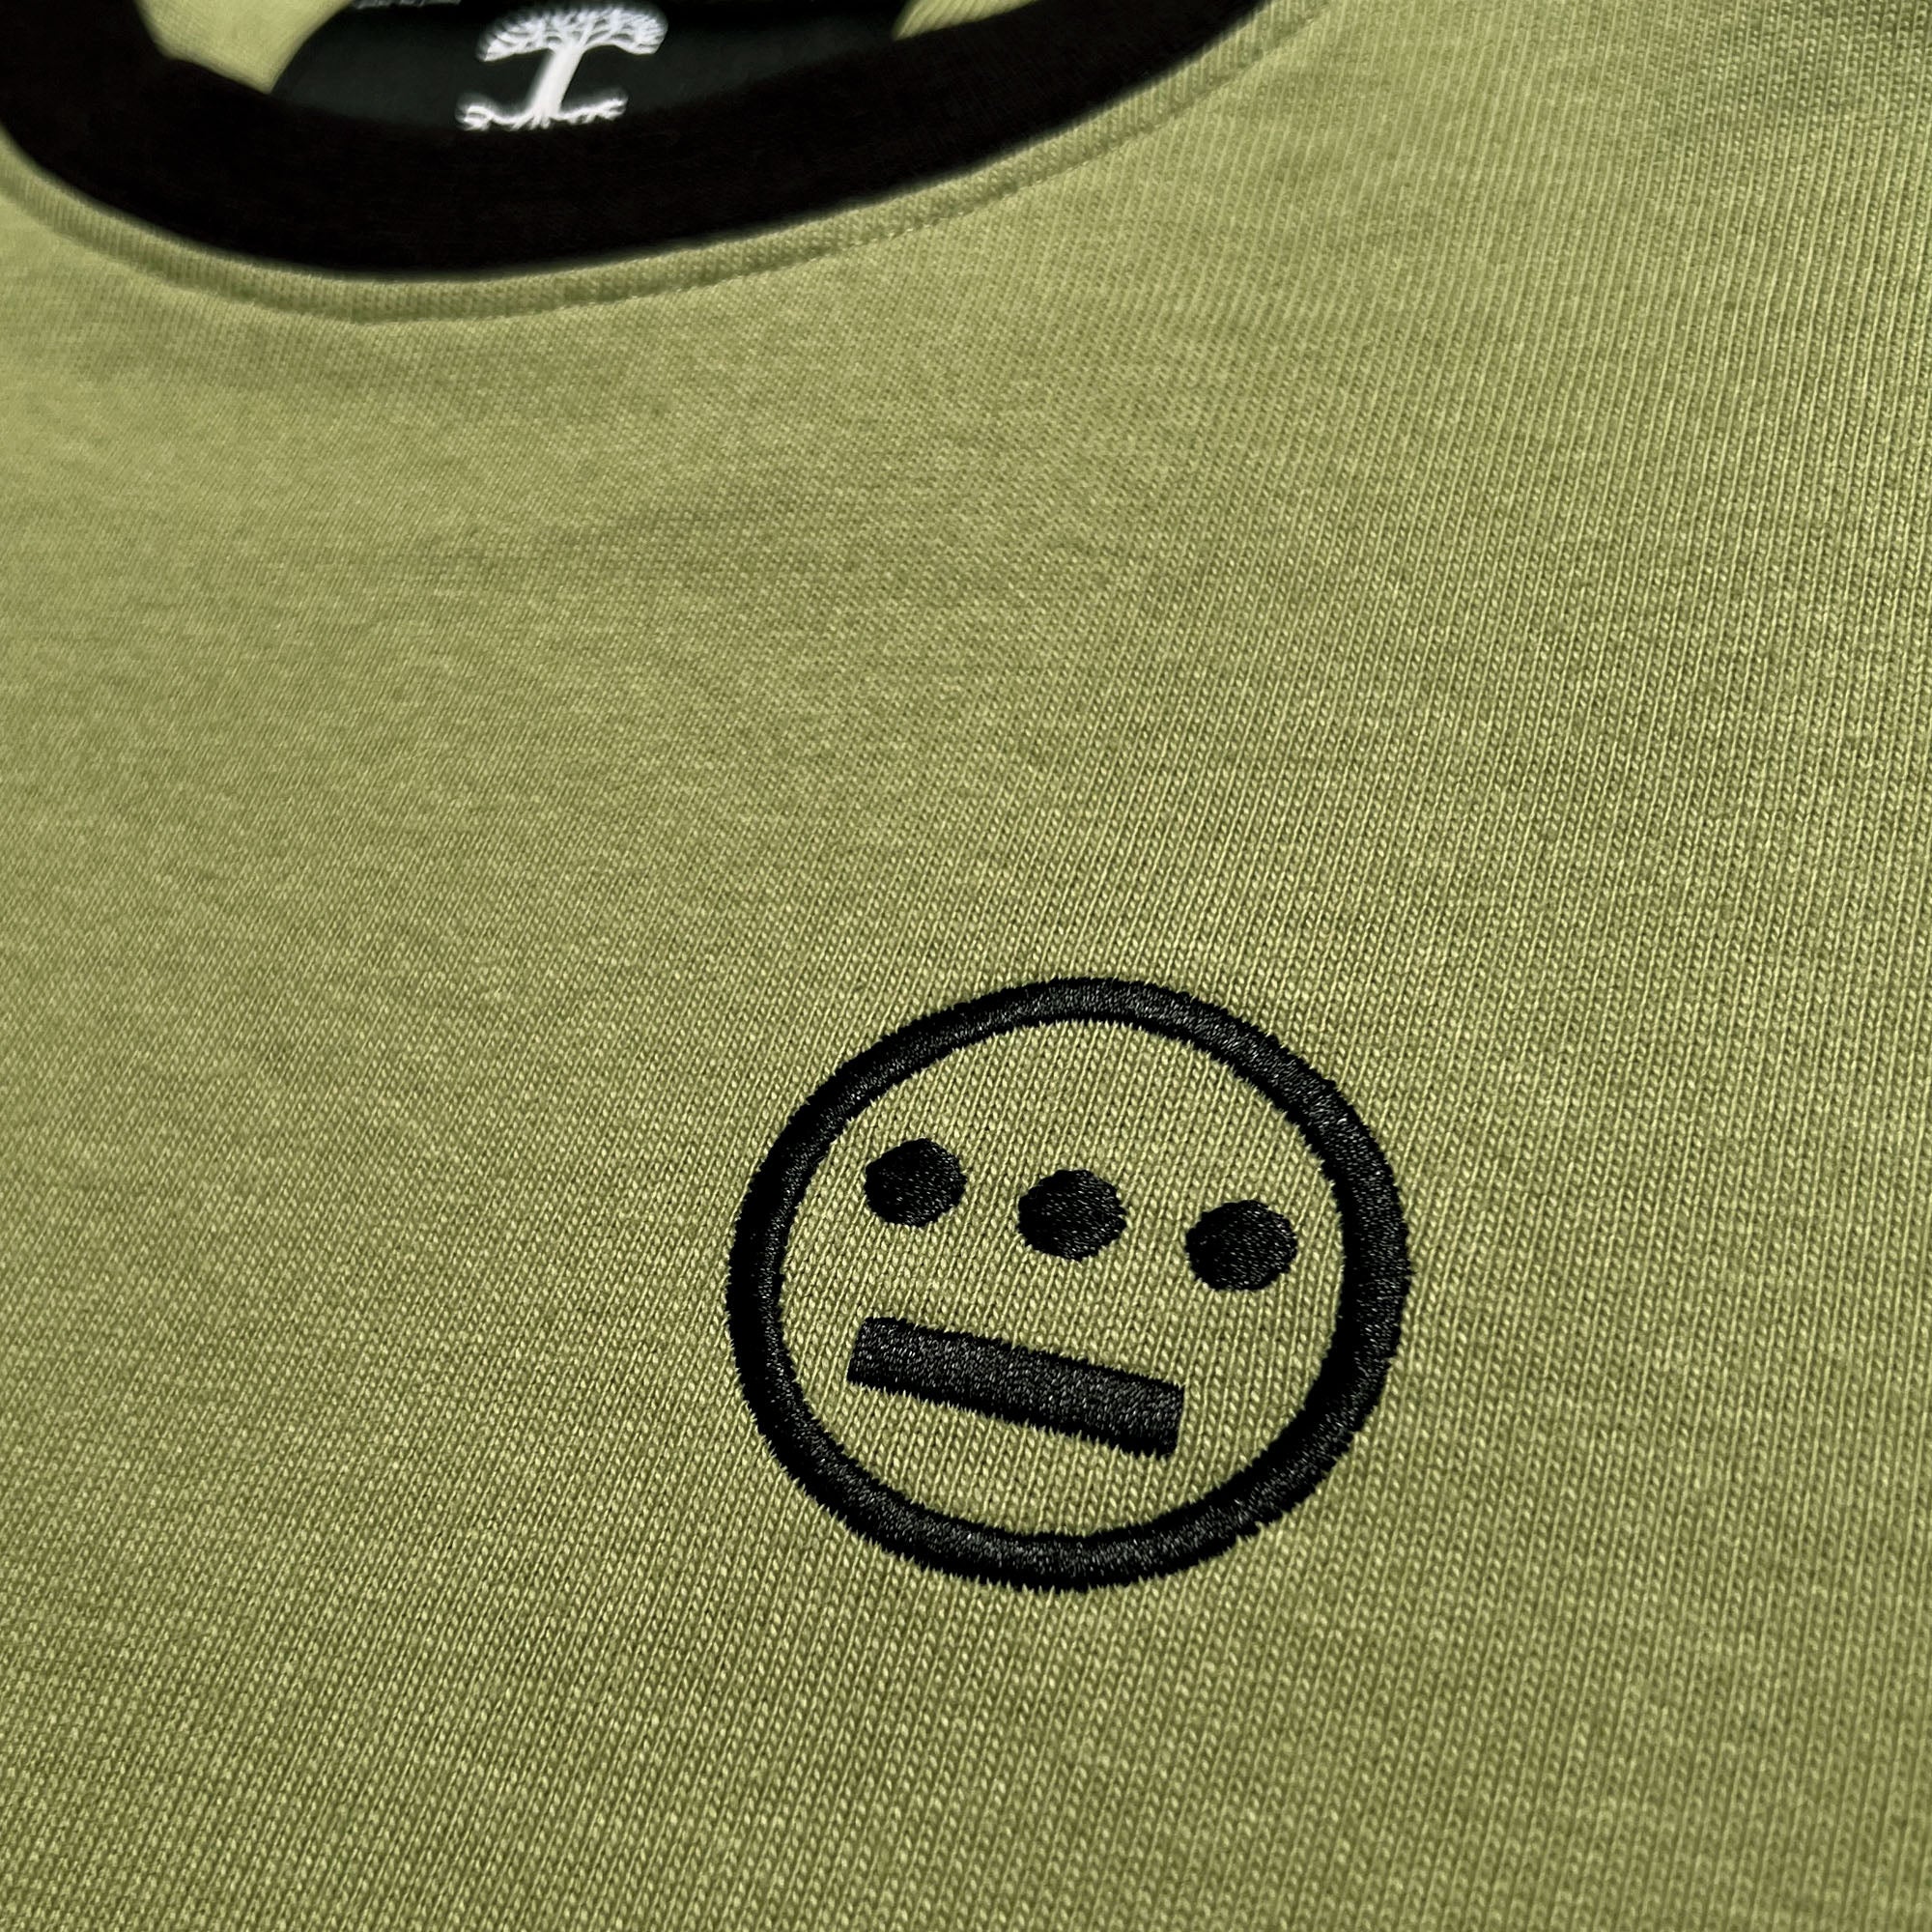 Detailed close-up of black embroidered Heiro hip-hop crew logo and black neck trim on an army green long-sleeve t-shirt. 